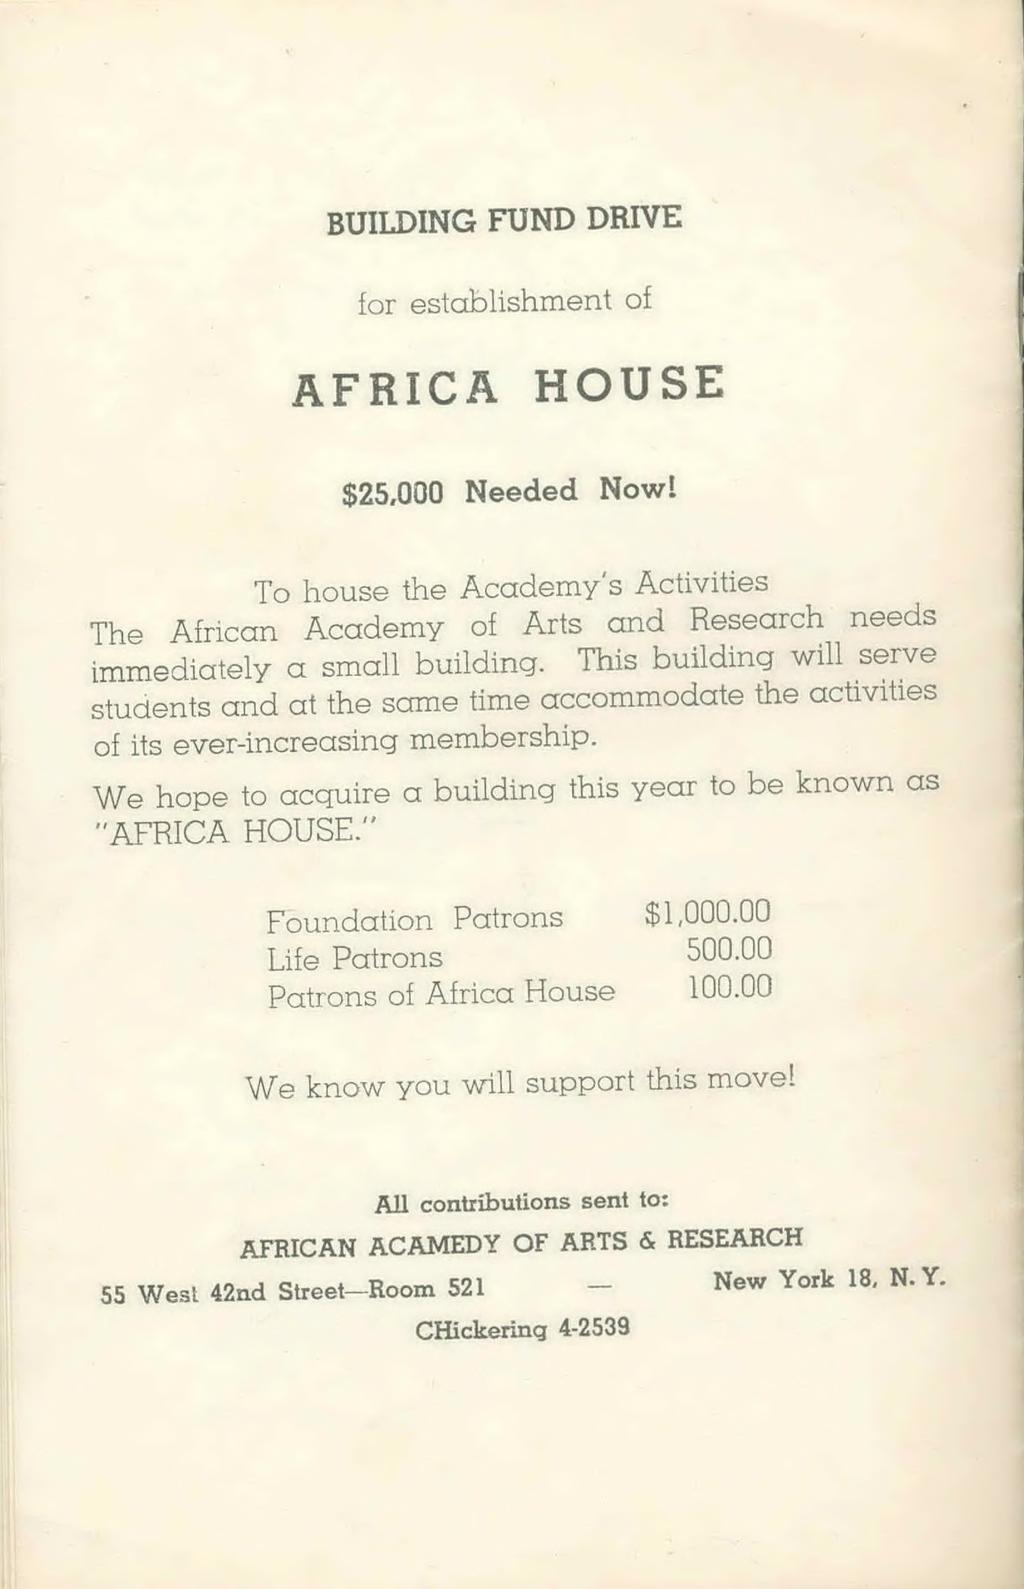 b u il d in g f u n d d r iv e for establishment of AFRICA HOUSE $25,000 N eeded Nowl To house the Academ y's Activities The African Academ y of Arts and Research needs immediately a small building.